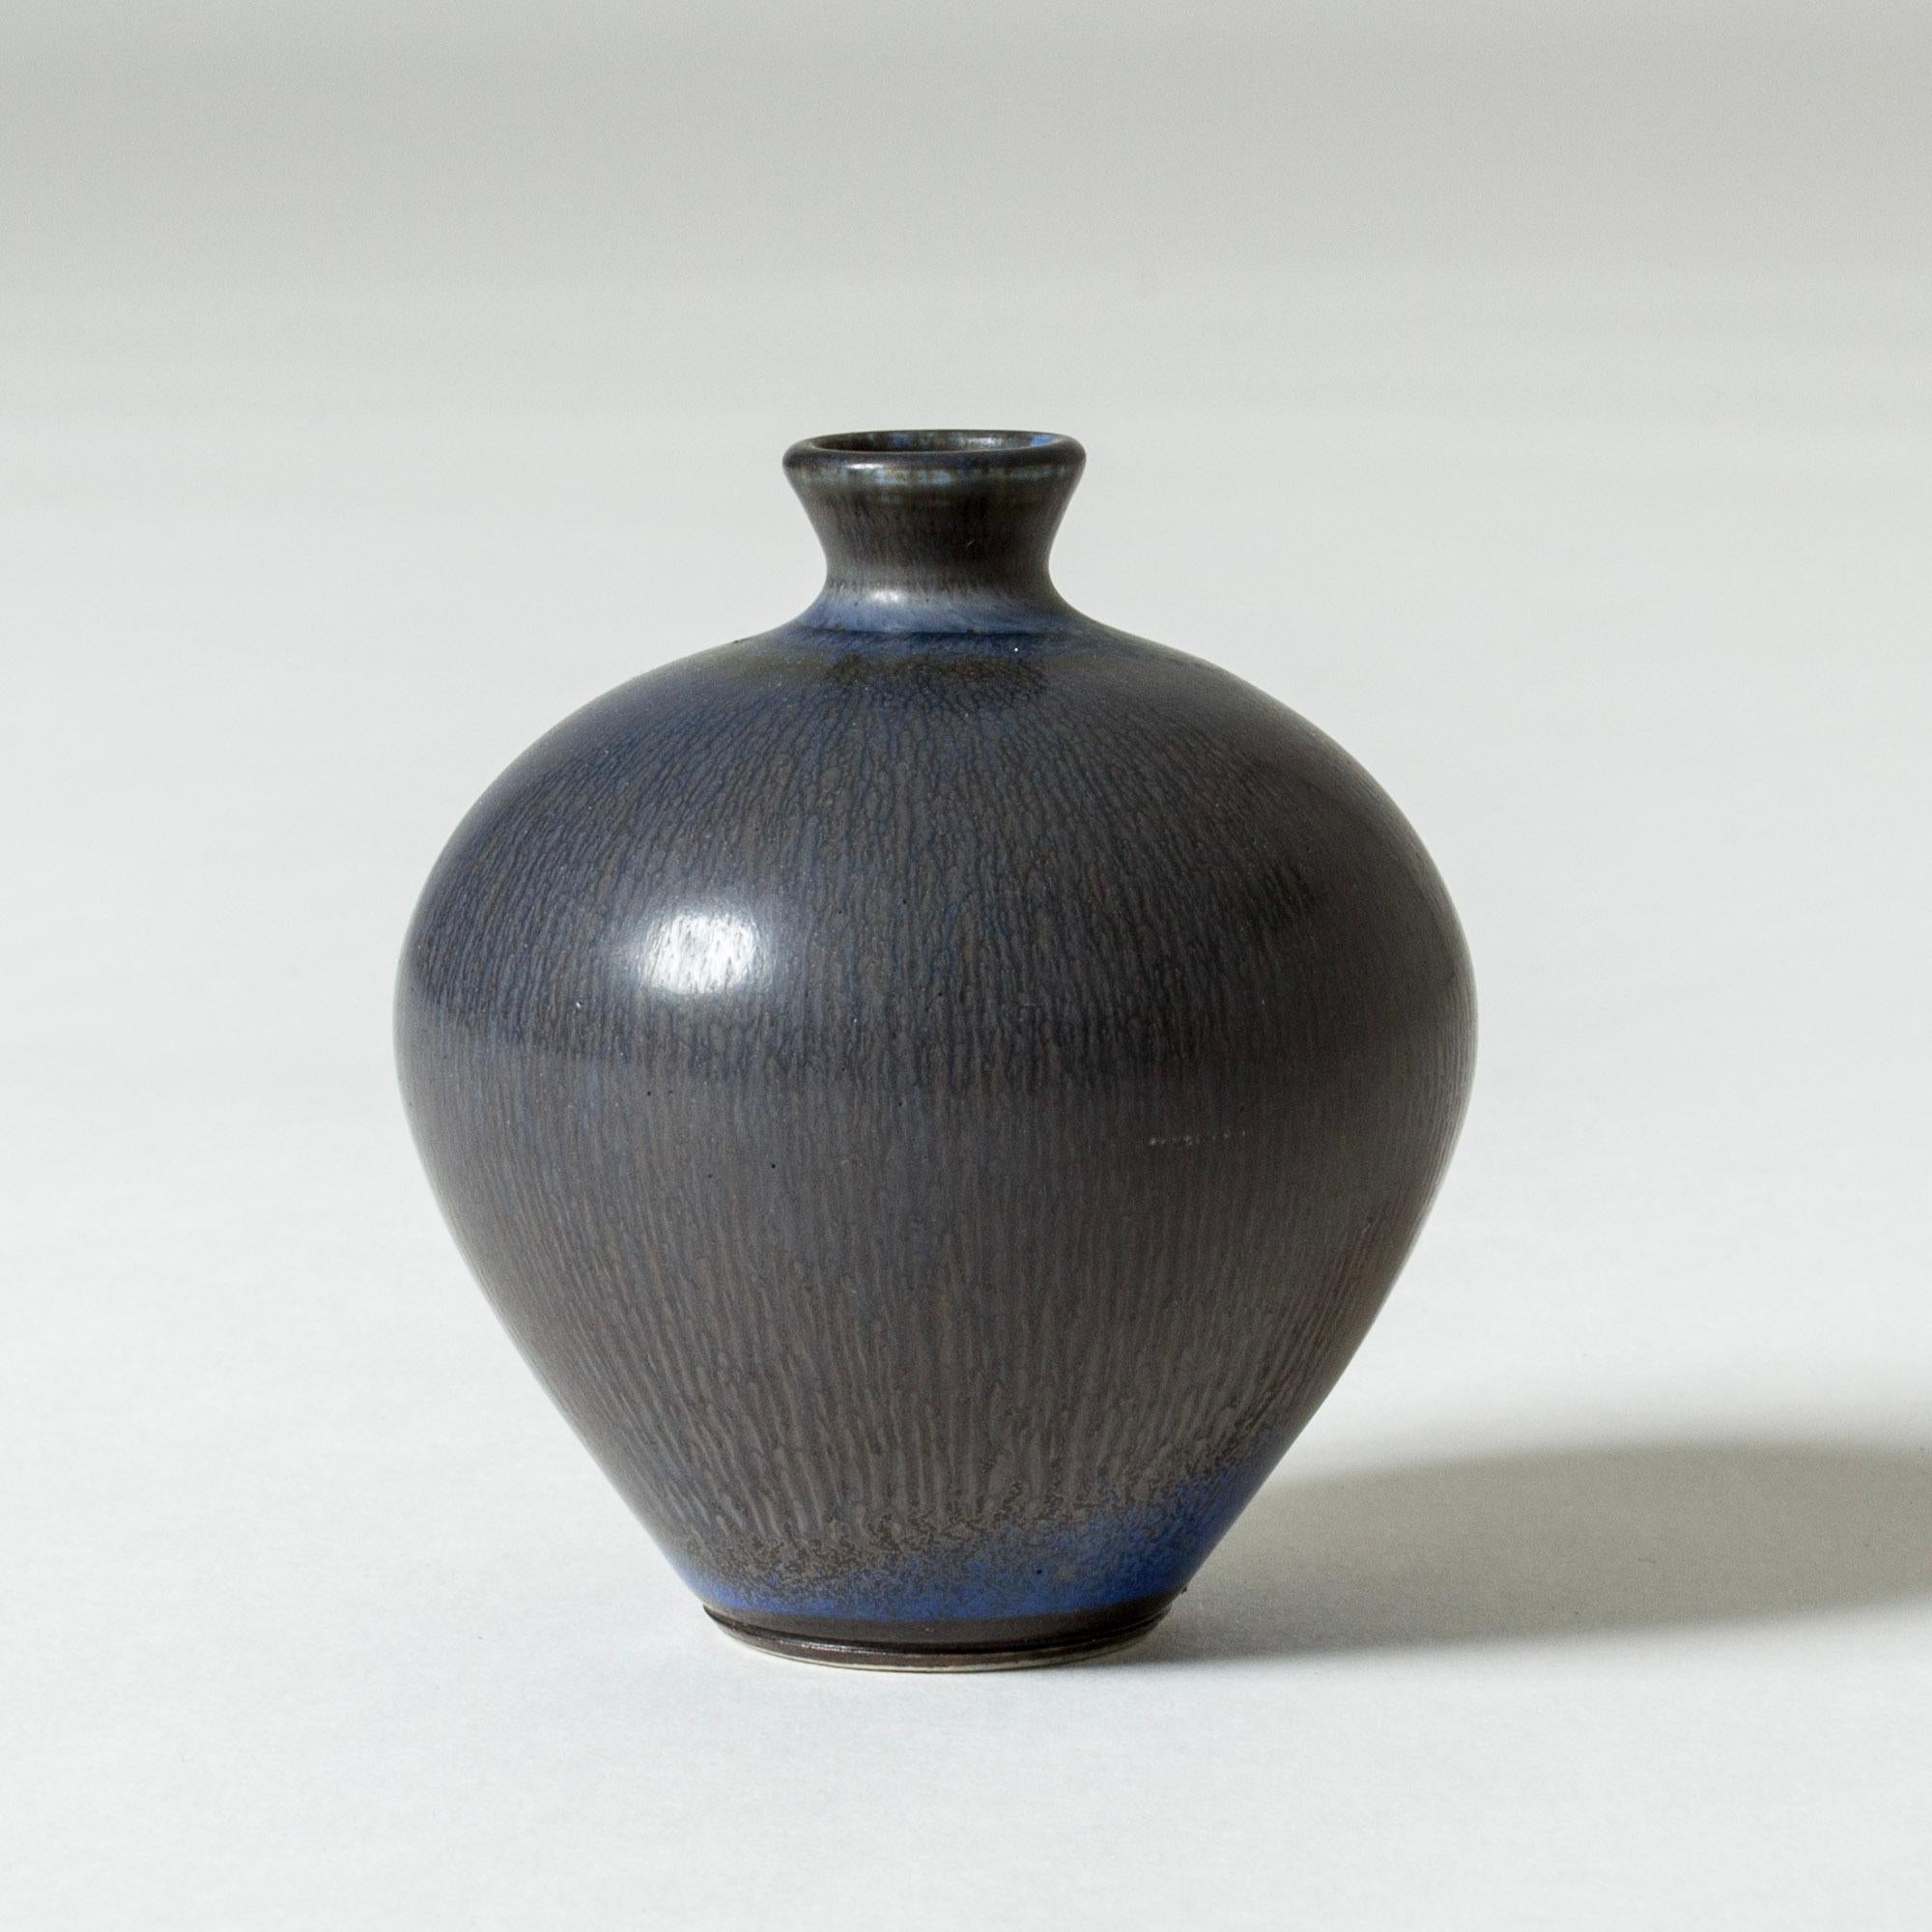 Miniature stoneware vase by Berndt Friberg in a plump apple form. Vibrant blue hare’s fur glaze.

Berndt Friberg was a Swedish ceramicist, renowned for his stoneware vases and vessels for Gustavsberg. His pure, composed designs with satiny,